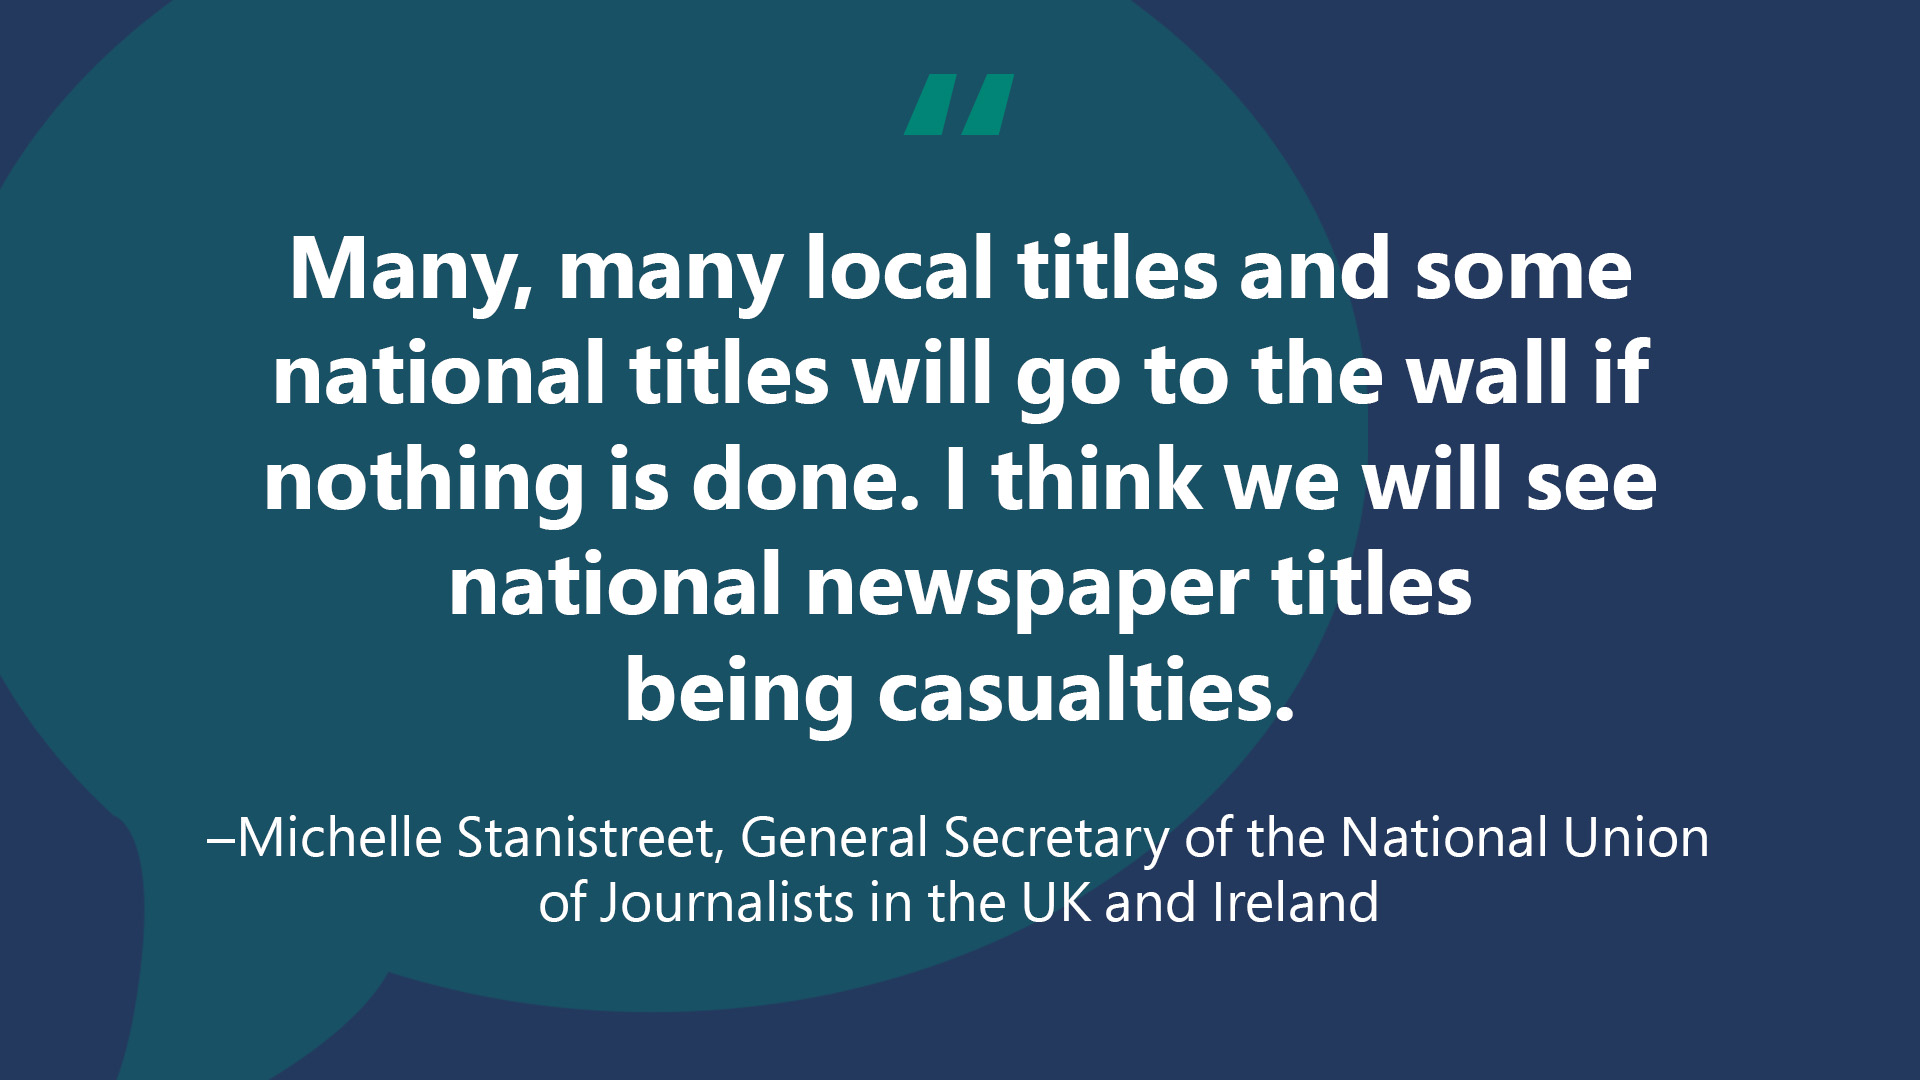 Quote card with text:“’Many, many local titles and some national titles will go to the wall if nothing is done. I think we will see national newspaper titles being casualties.”